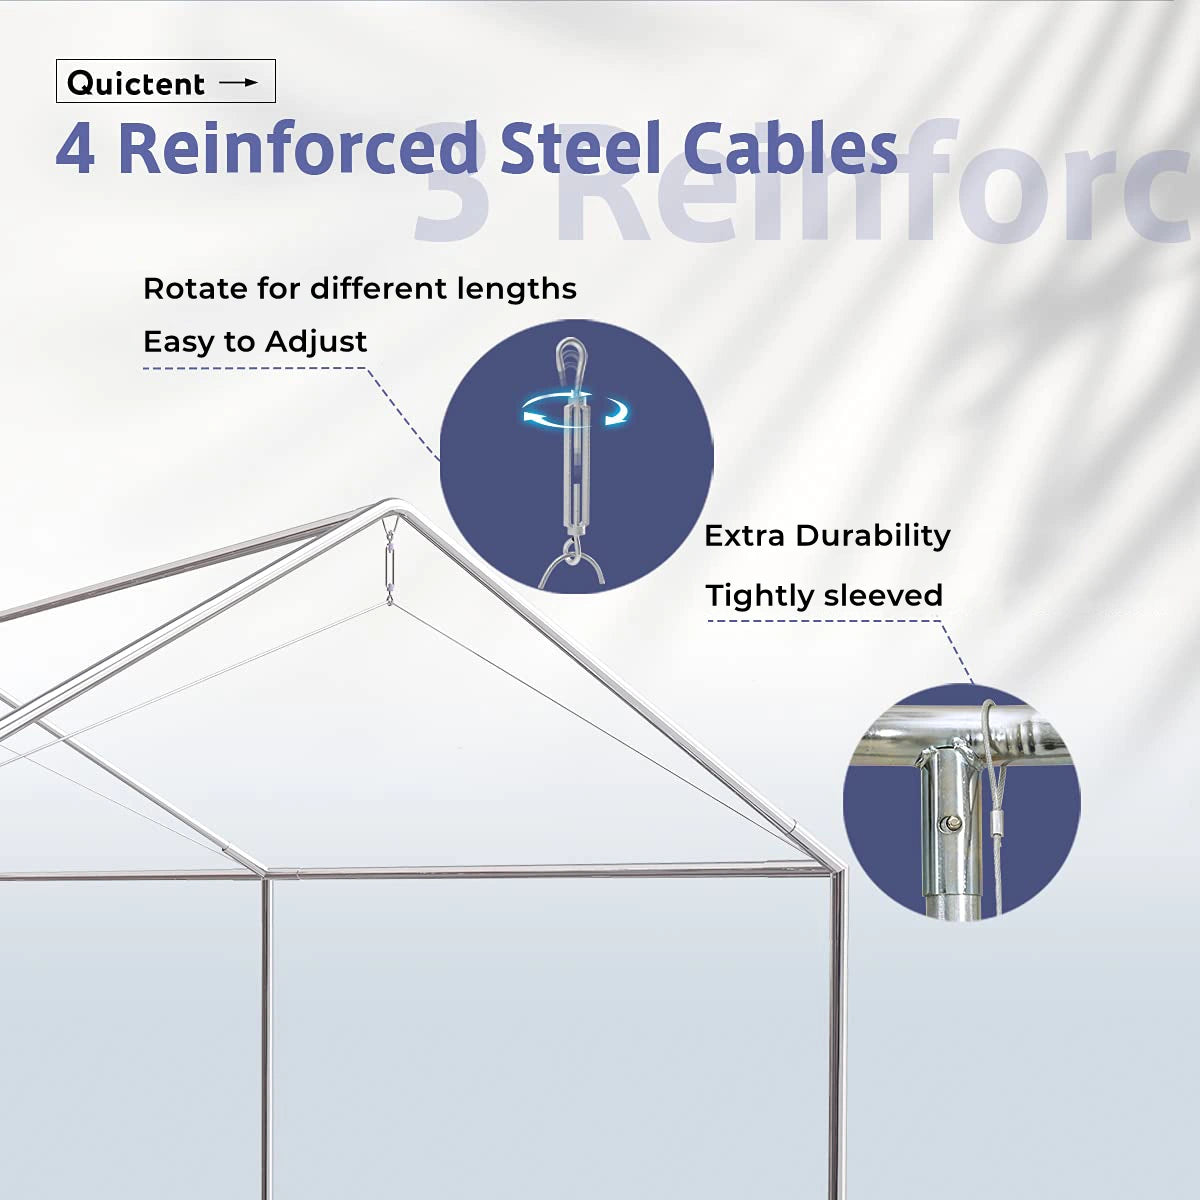 reinforced steel cables